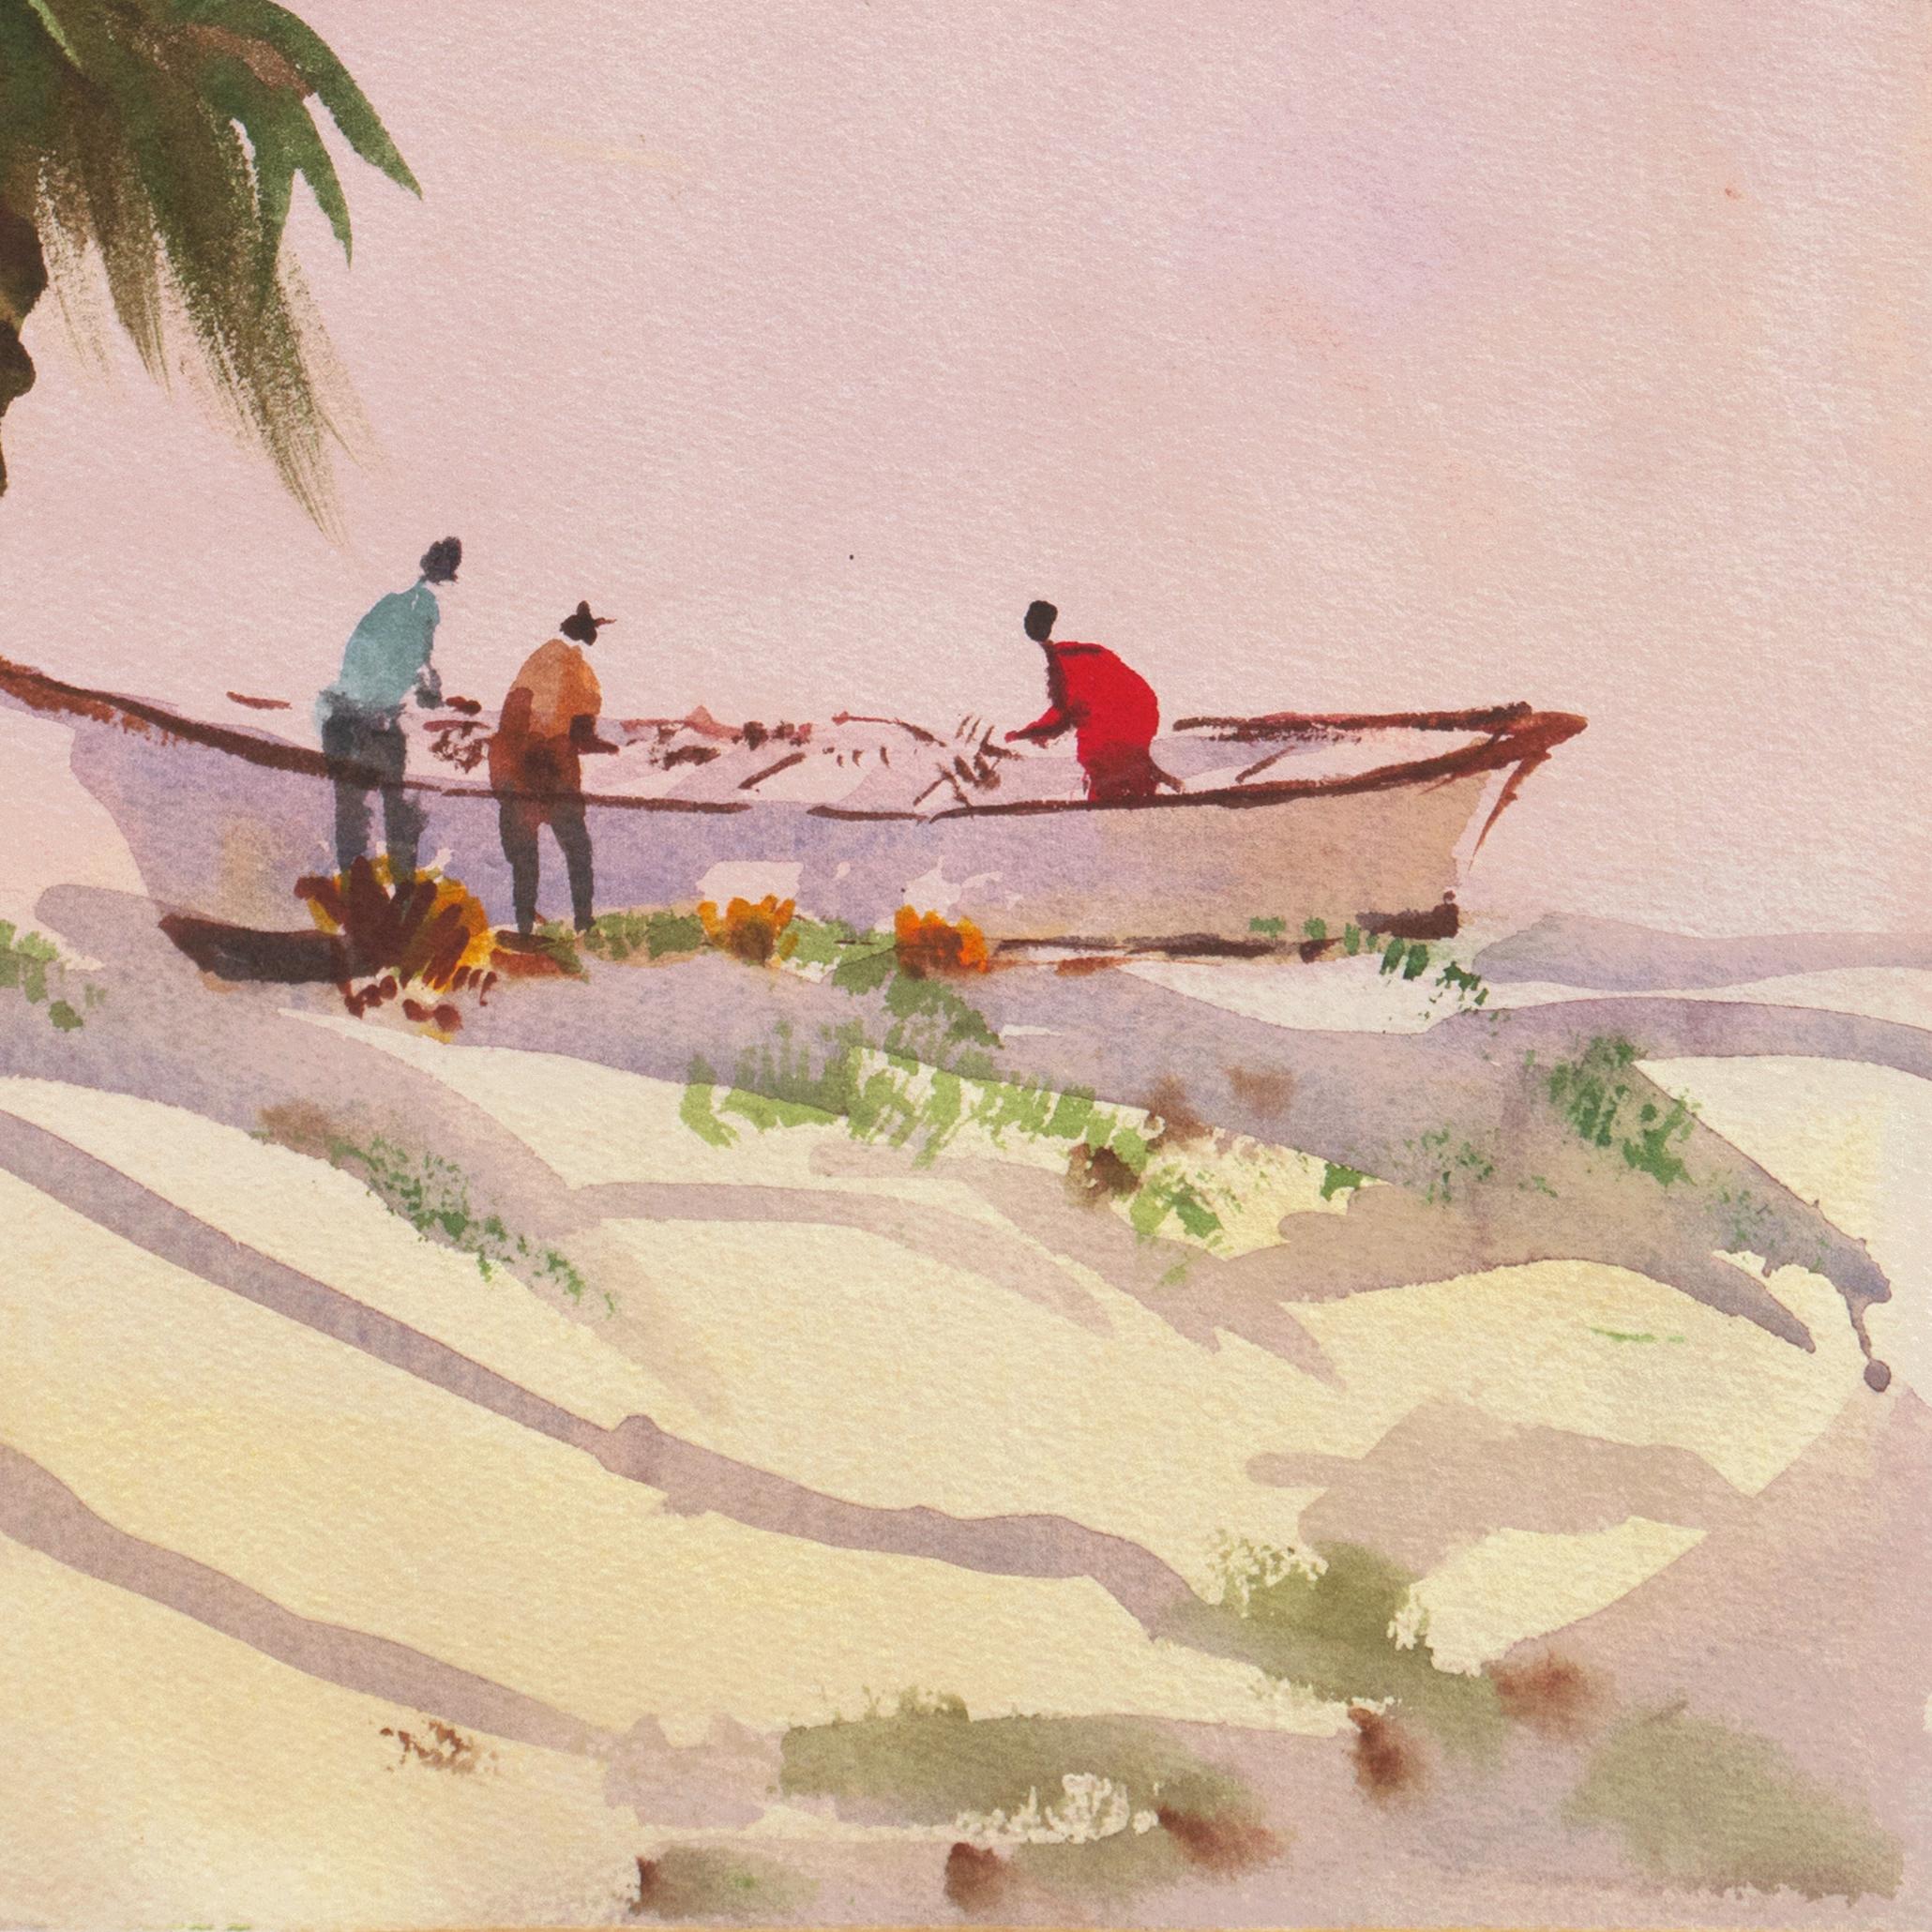 Watercolor painting of fishermen mending their nets in the shade of palm trees beneath a sunset sky. 

Signed lower left 